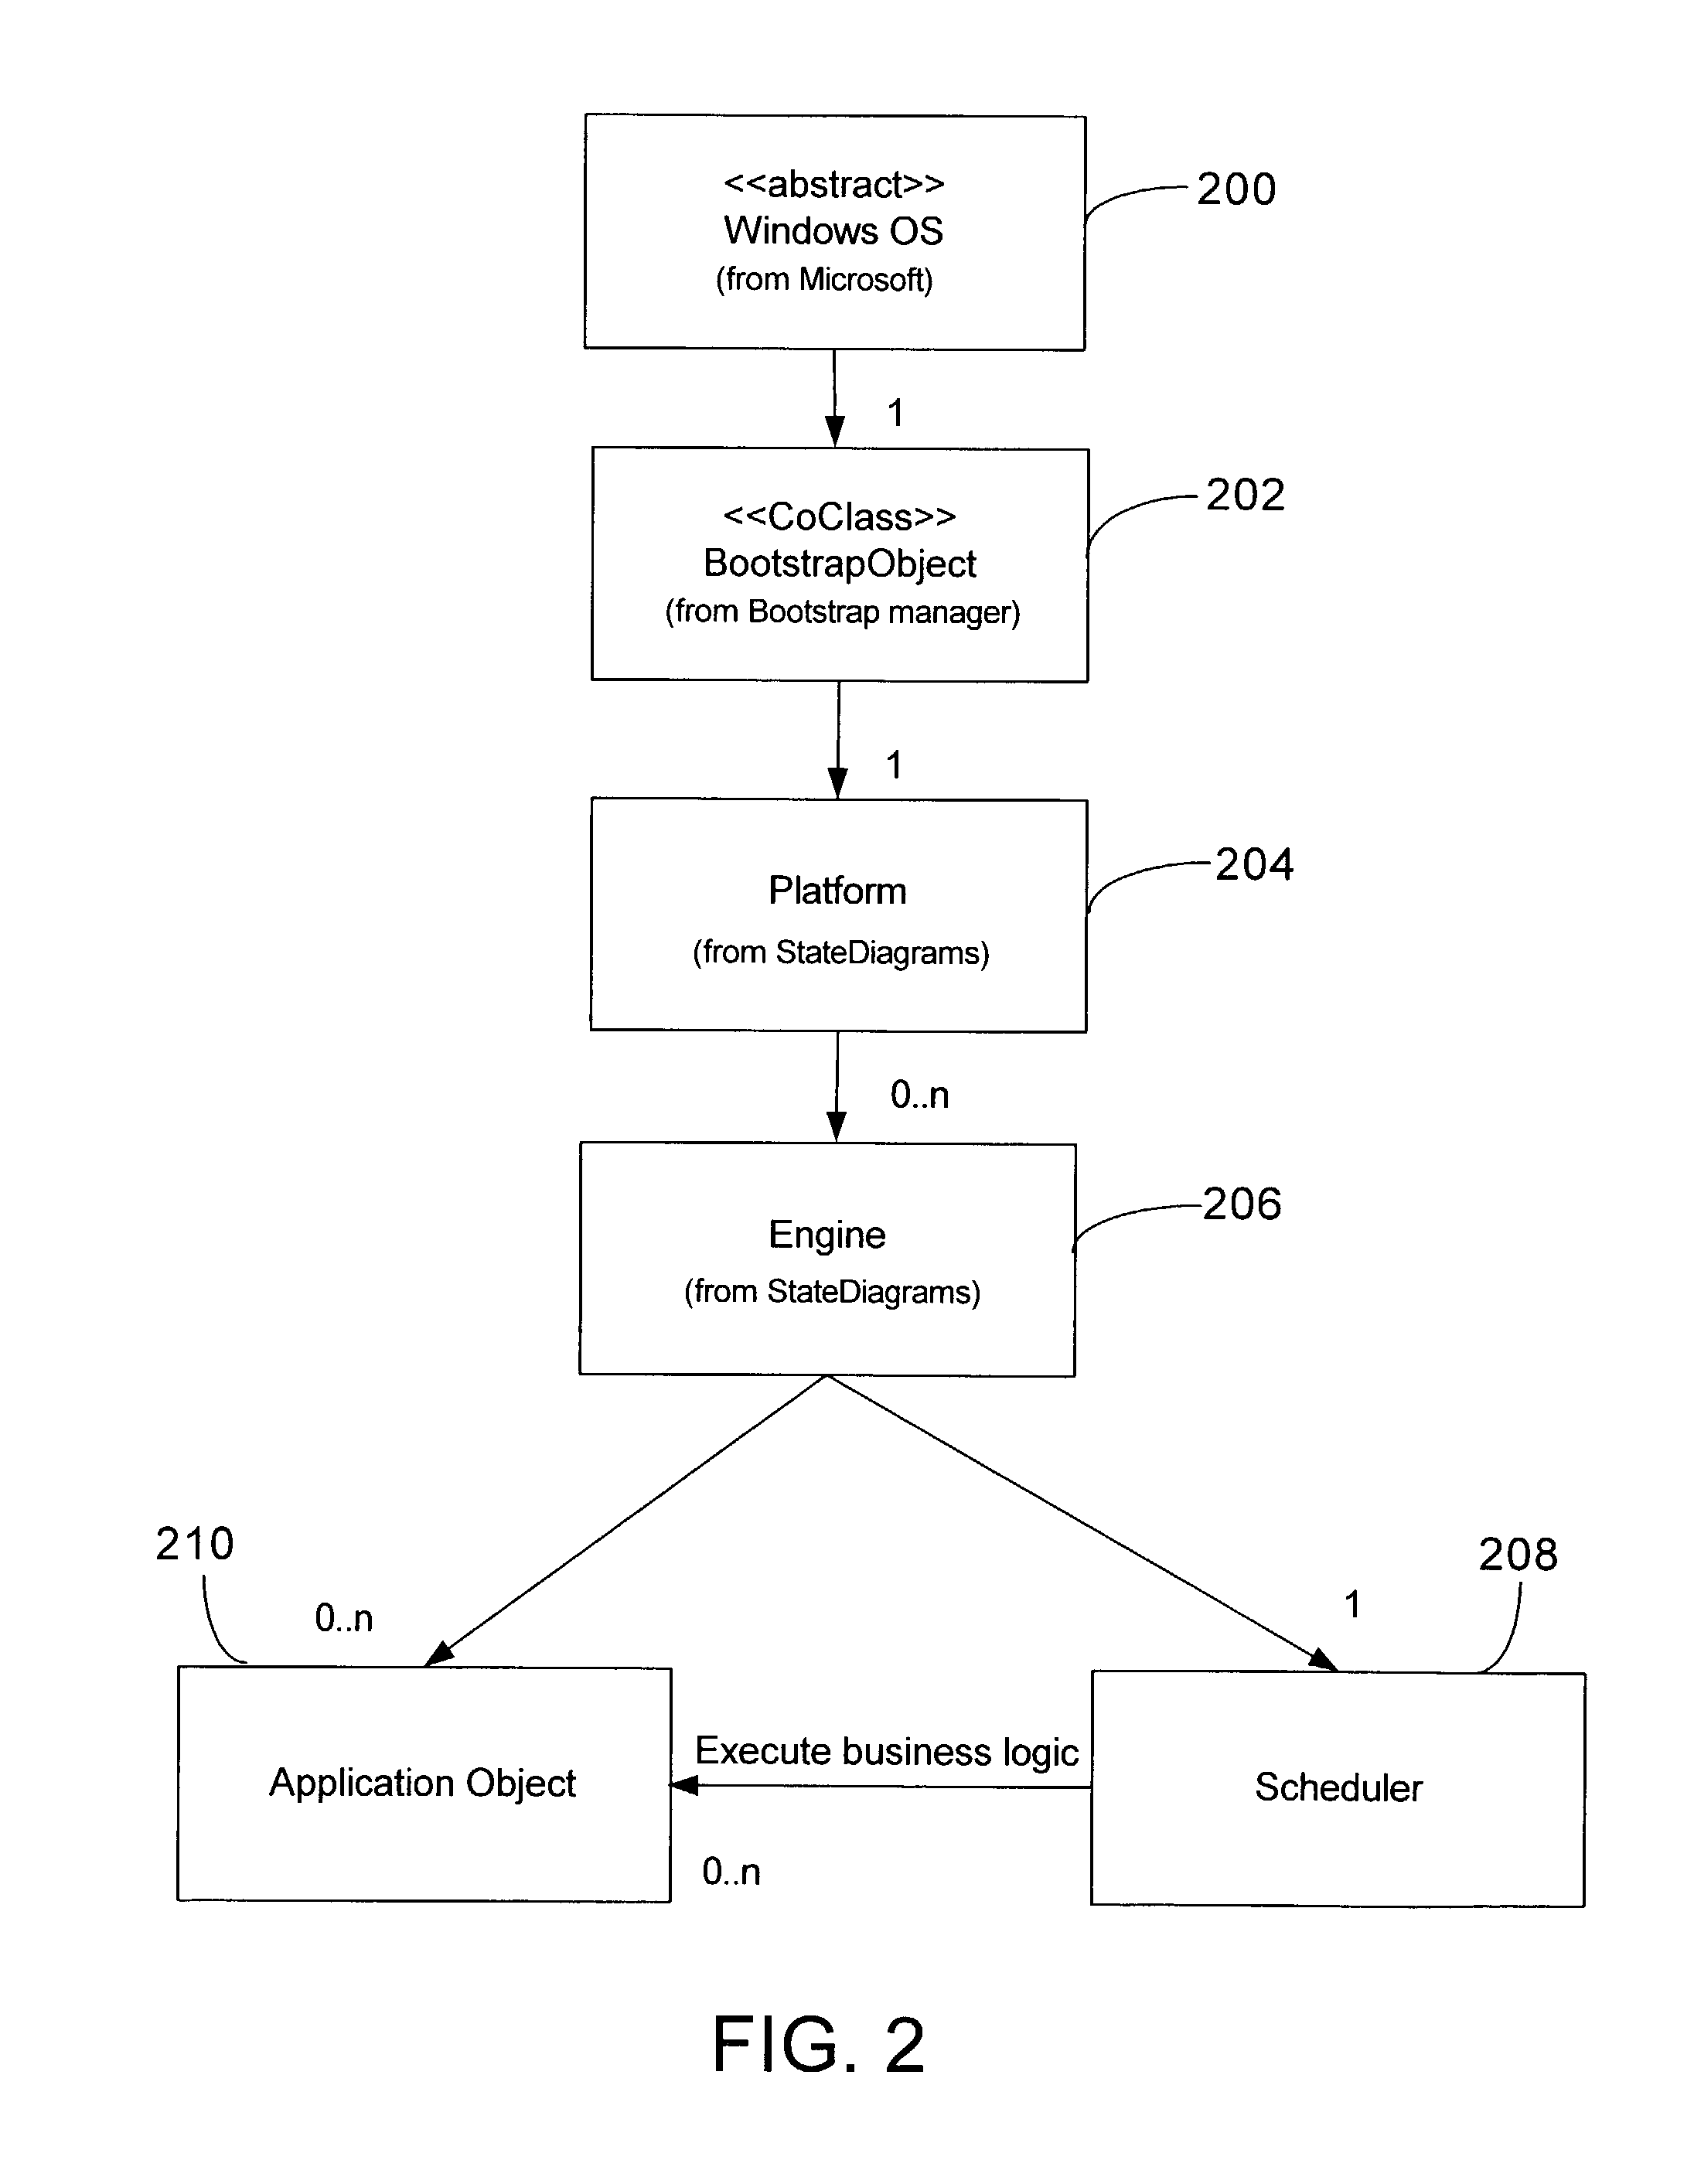 Process control script development and execution facility supporting multiple user-side programming languages